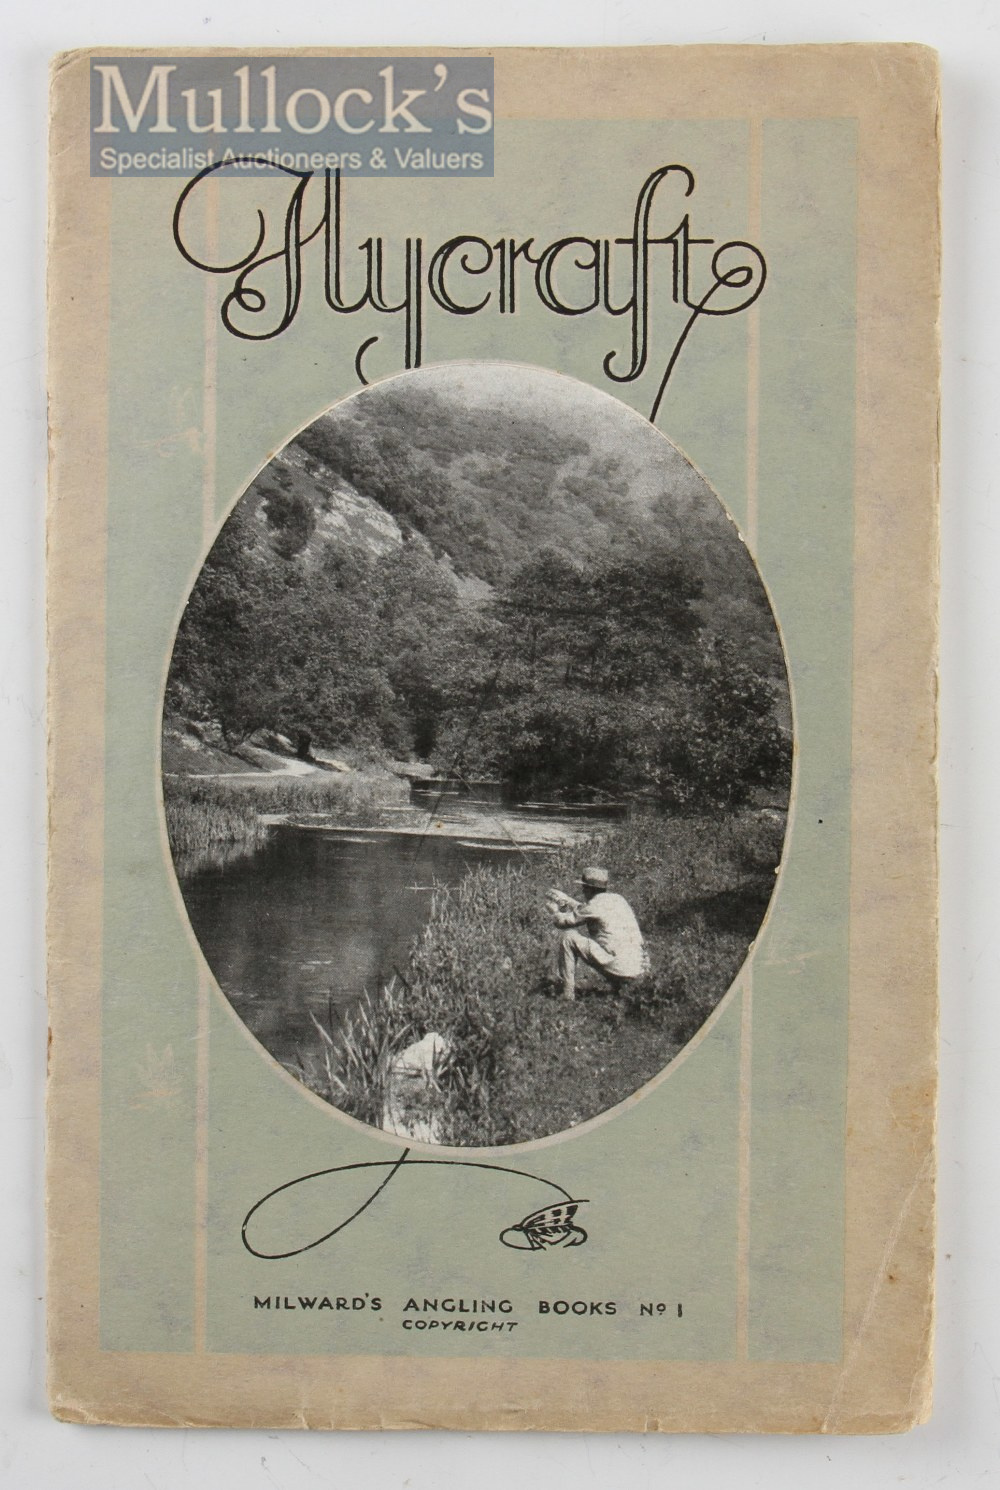 Fishing Book - Milward’s Angling Books “Flycraft” No1 booklet, c.1930, illustrated, card covers,